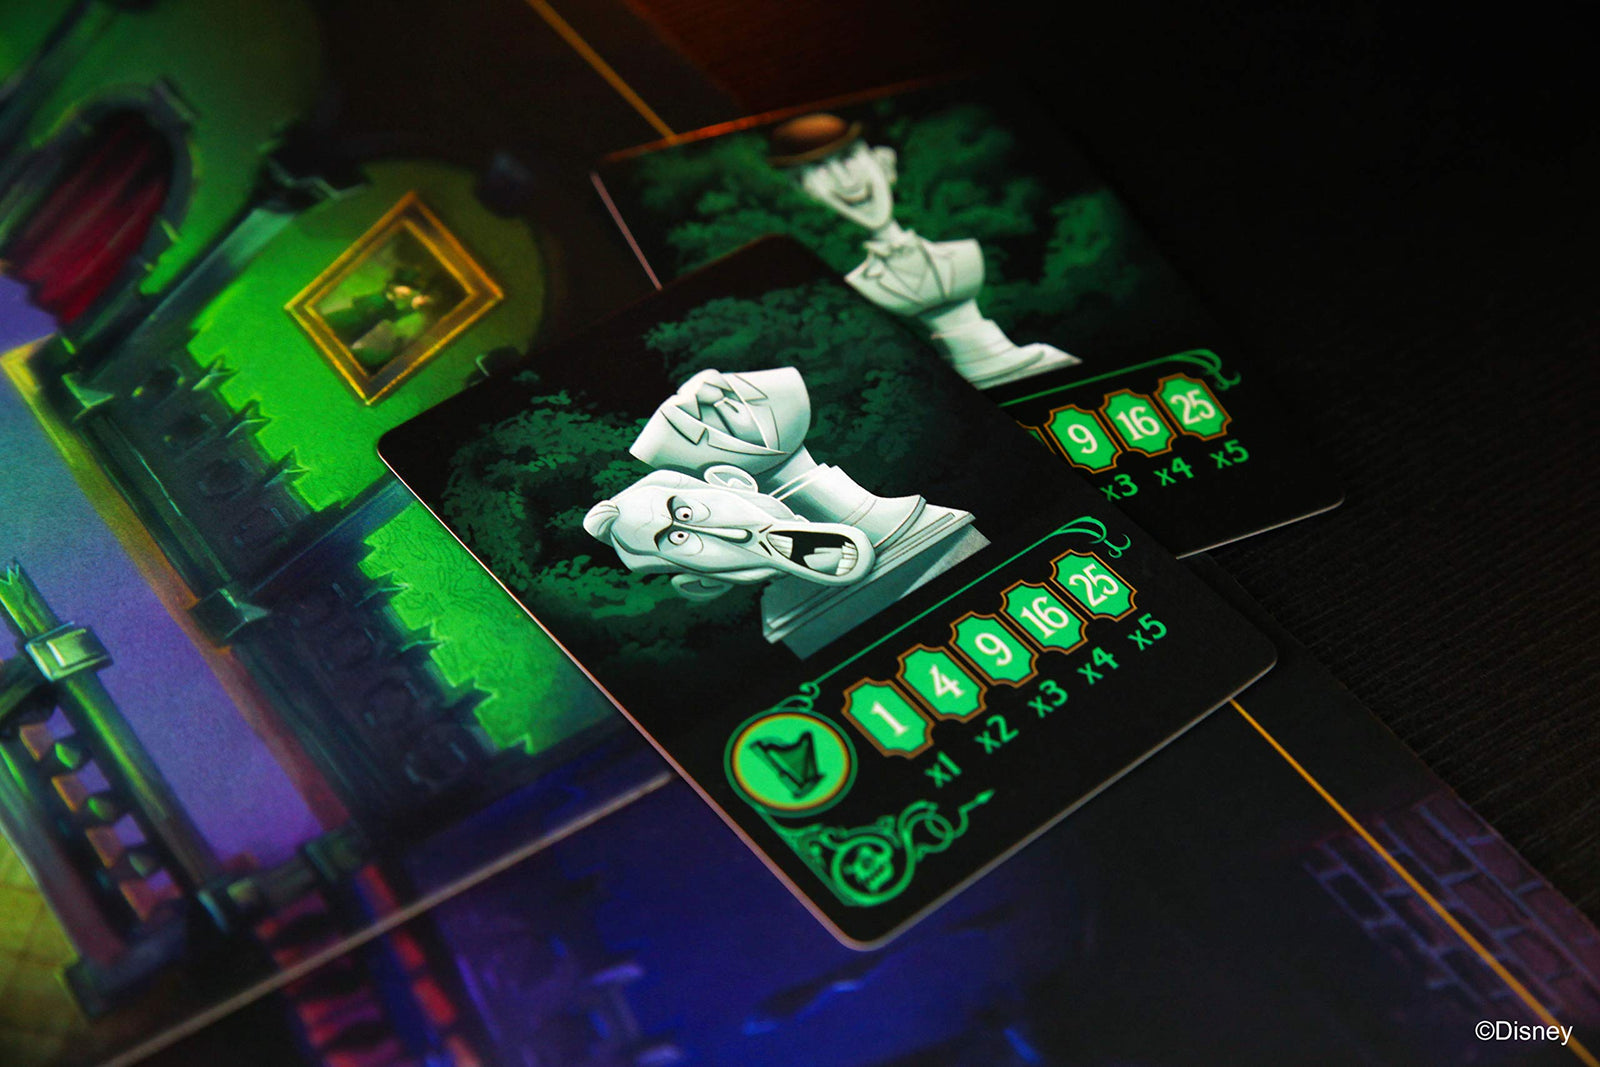 Funko Disney The Haunted Mansion – Call of The Spirits Board Game